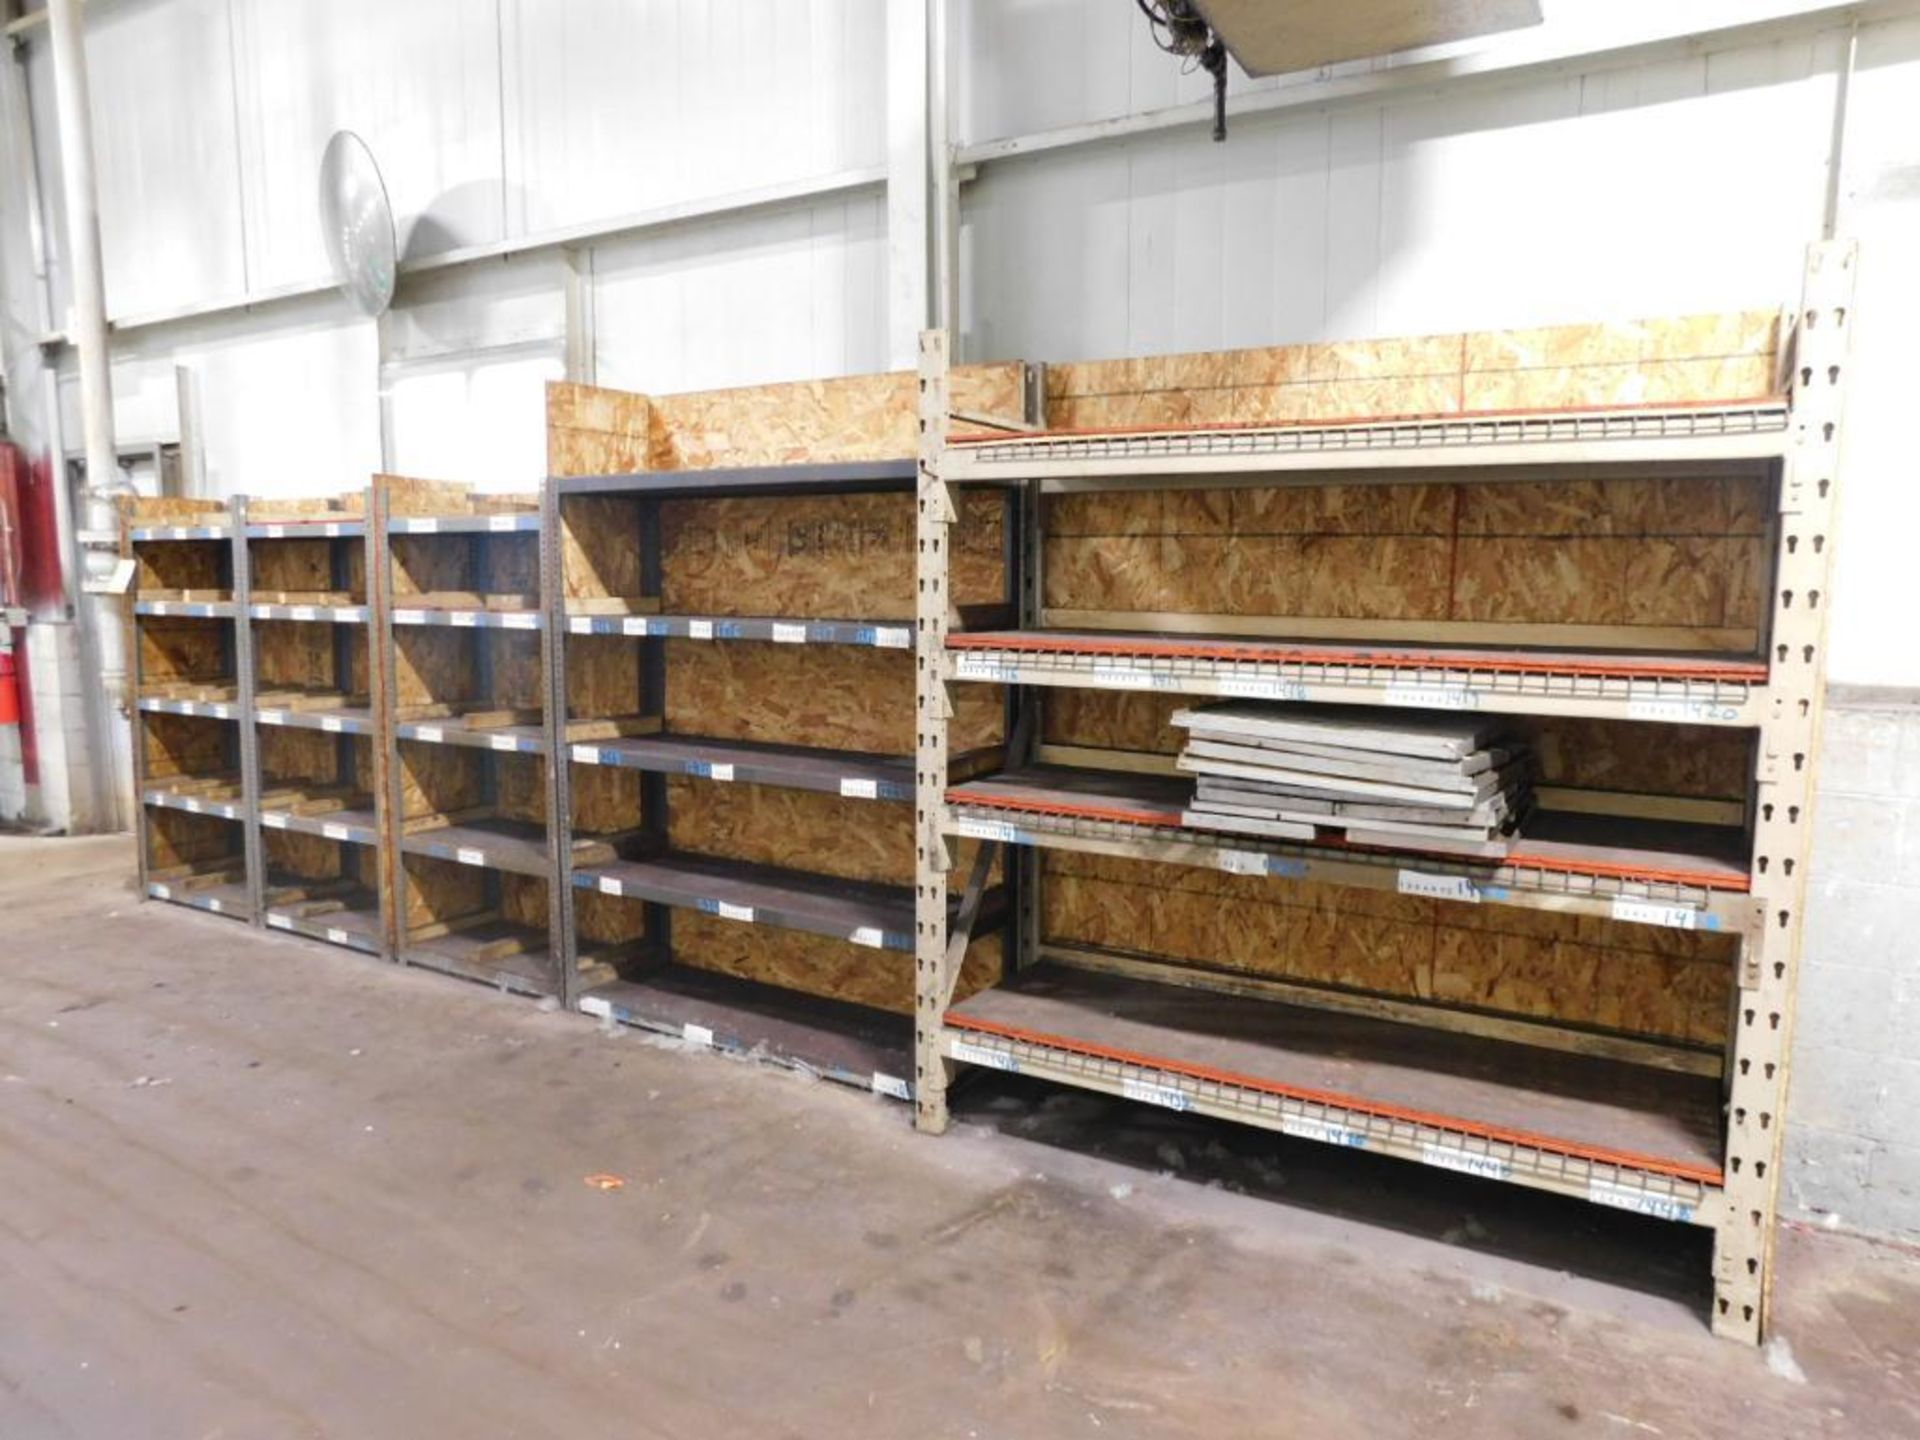 LOT: (16) Shelves, (1) Section of 7' x 6' x 24" Racking, Wood Table, 80" H x 120" W x 60" D Heavy Du - Image 2 of 11